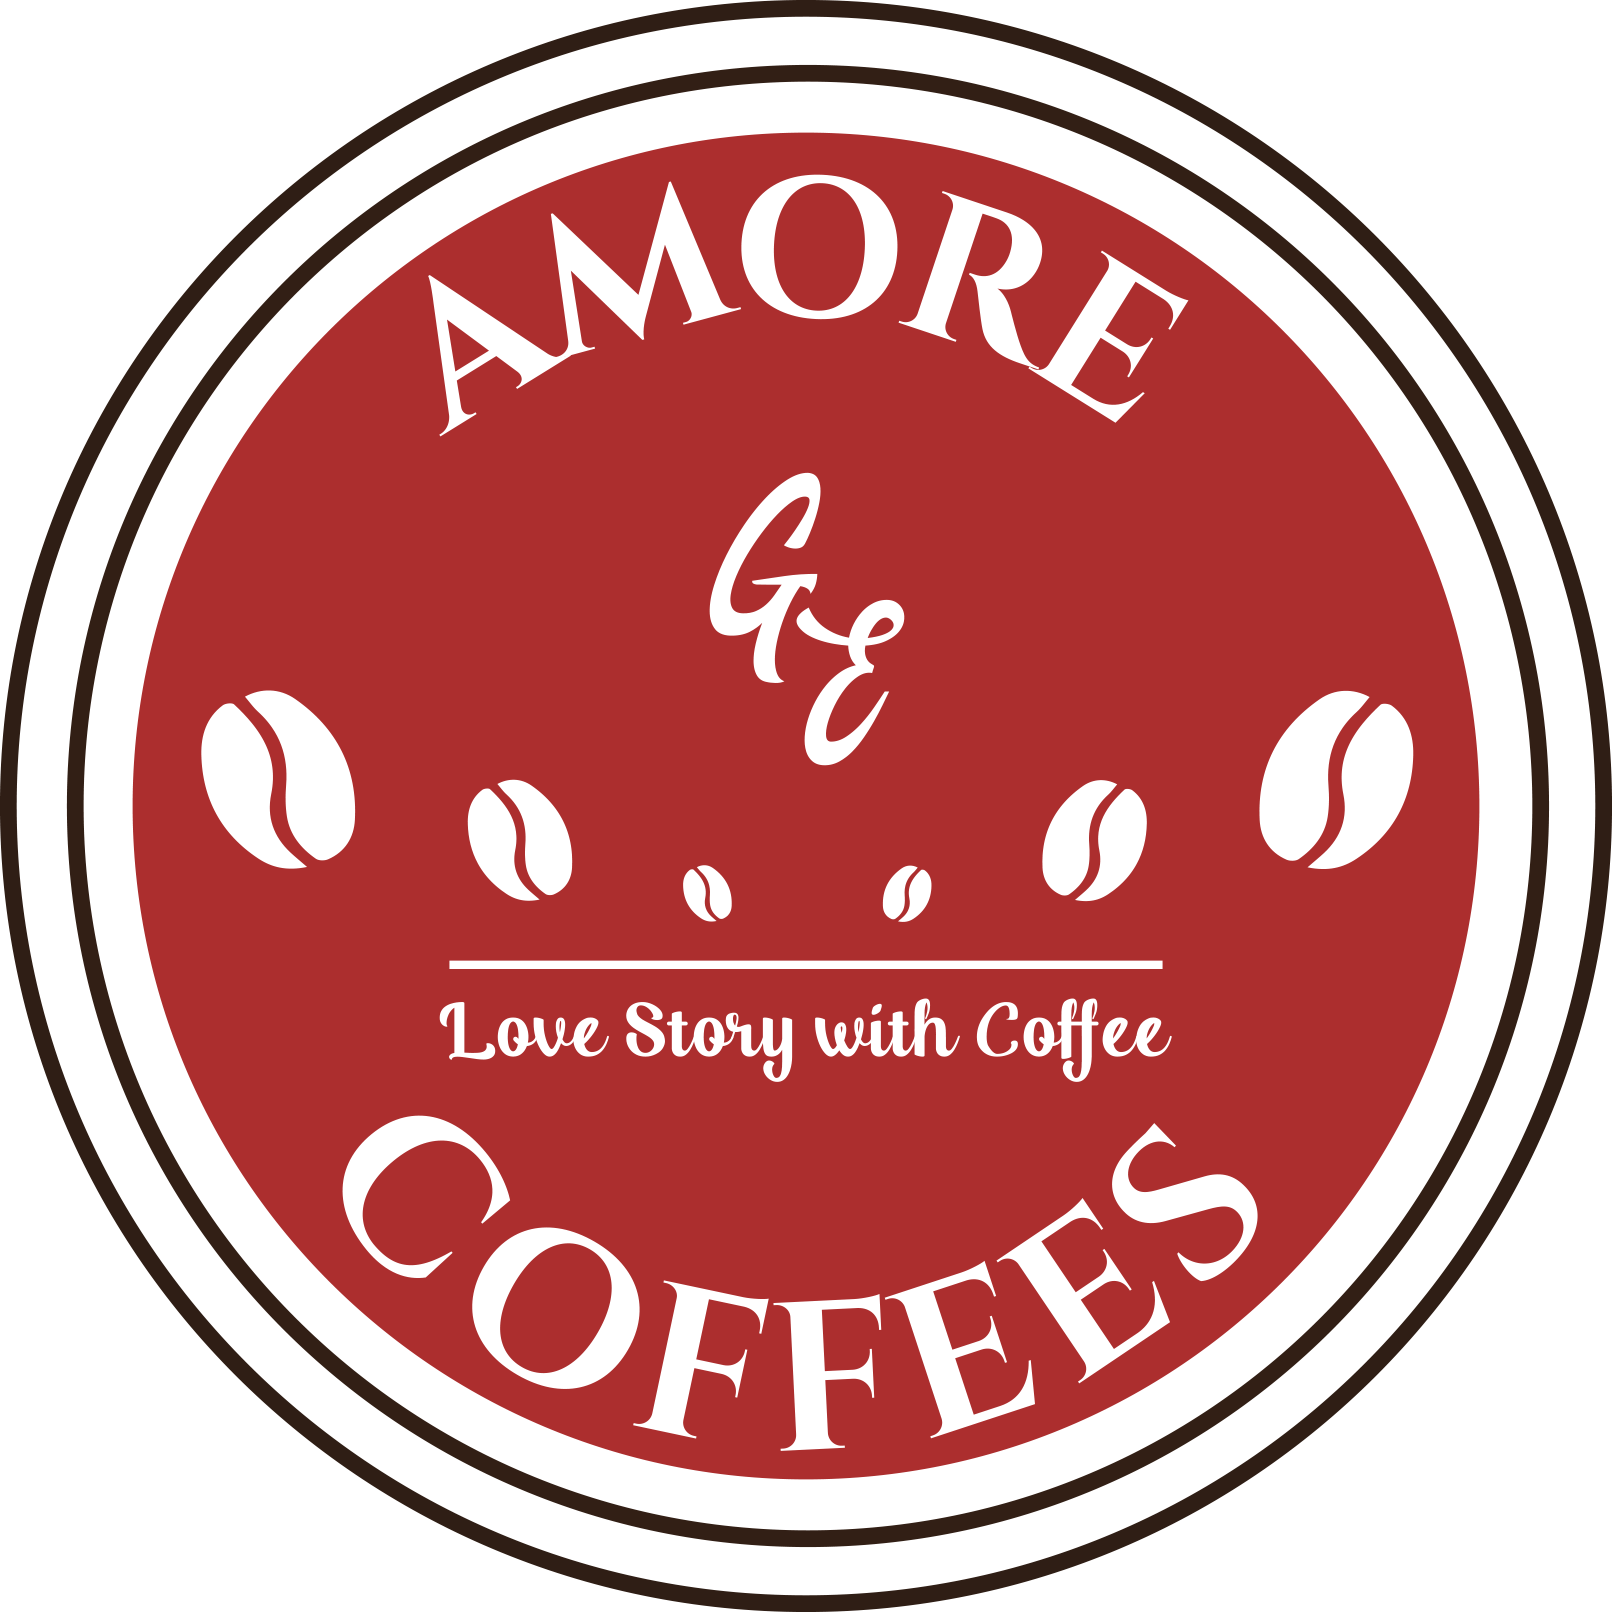 Amore Coffees